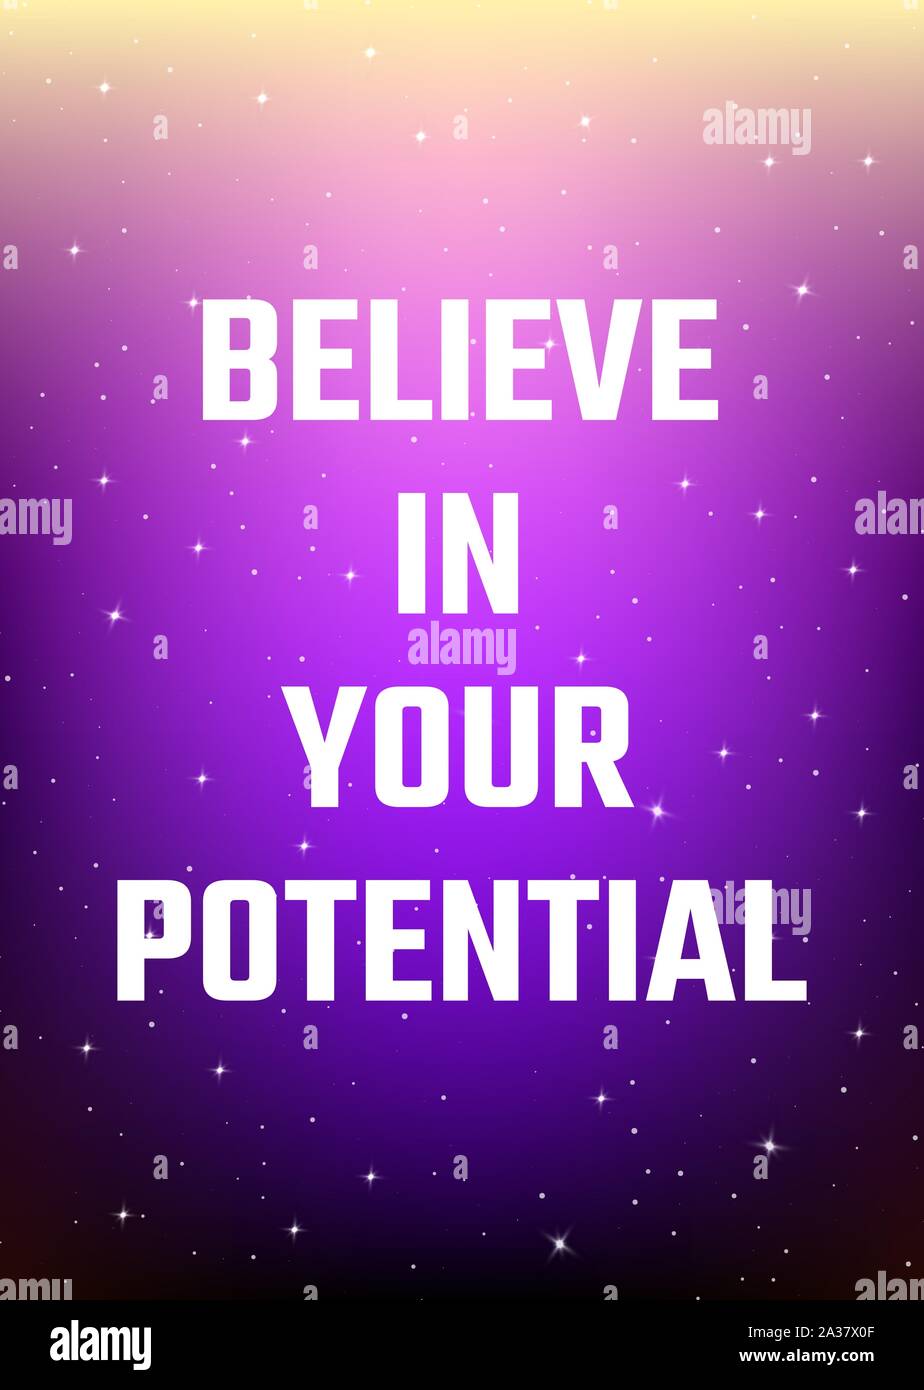 Motivational poster. Believe in your potential. Open space, starry sky style. Print design. Dark background Stock Vector